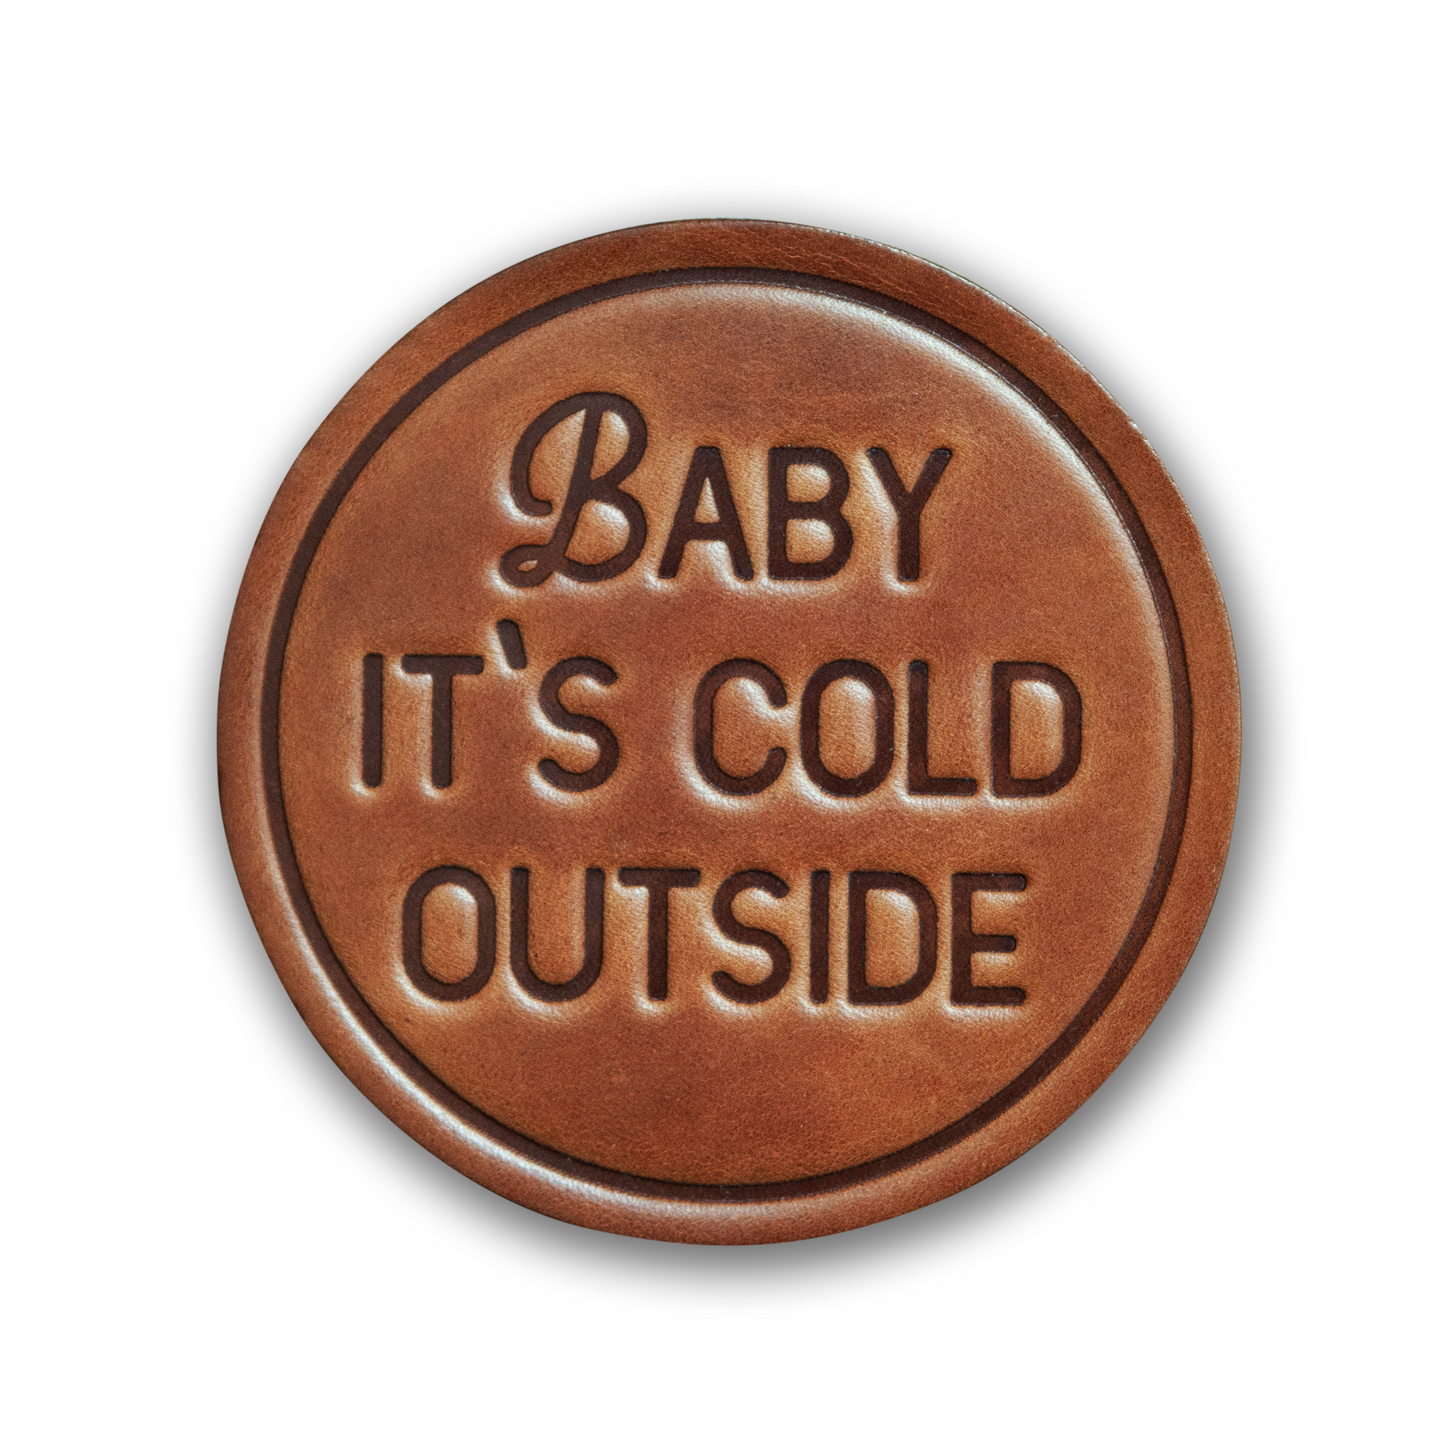 BABY IT’S COLD OUTSIDE COASTER